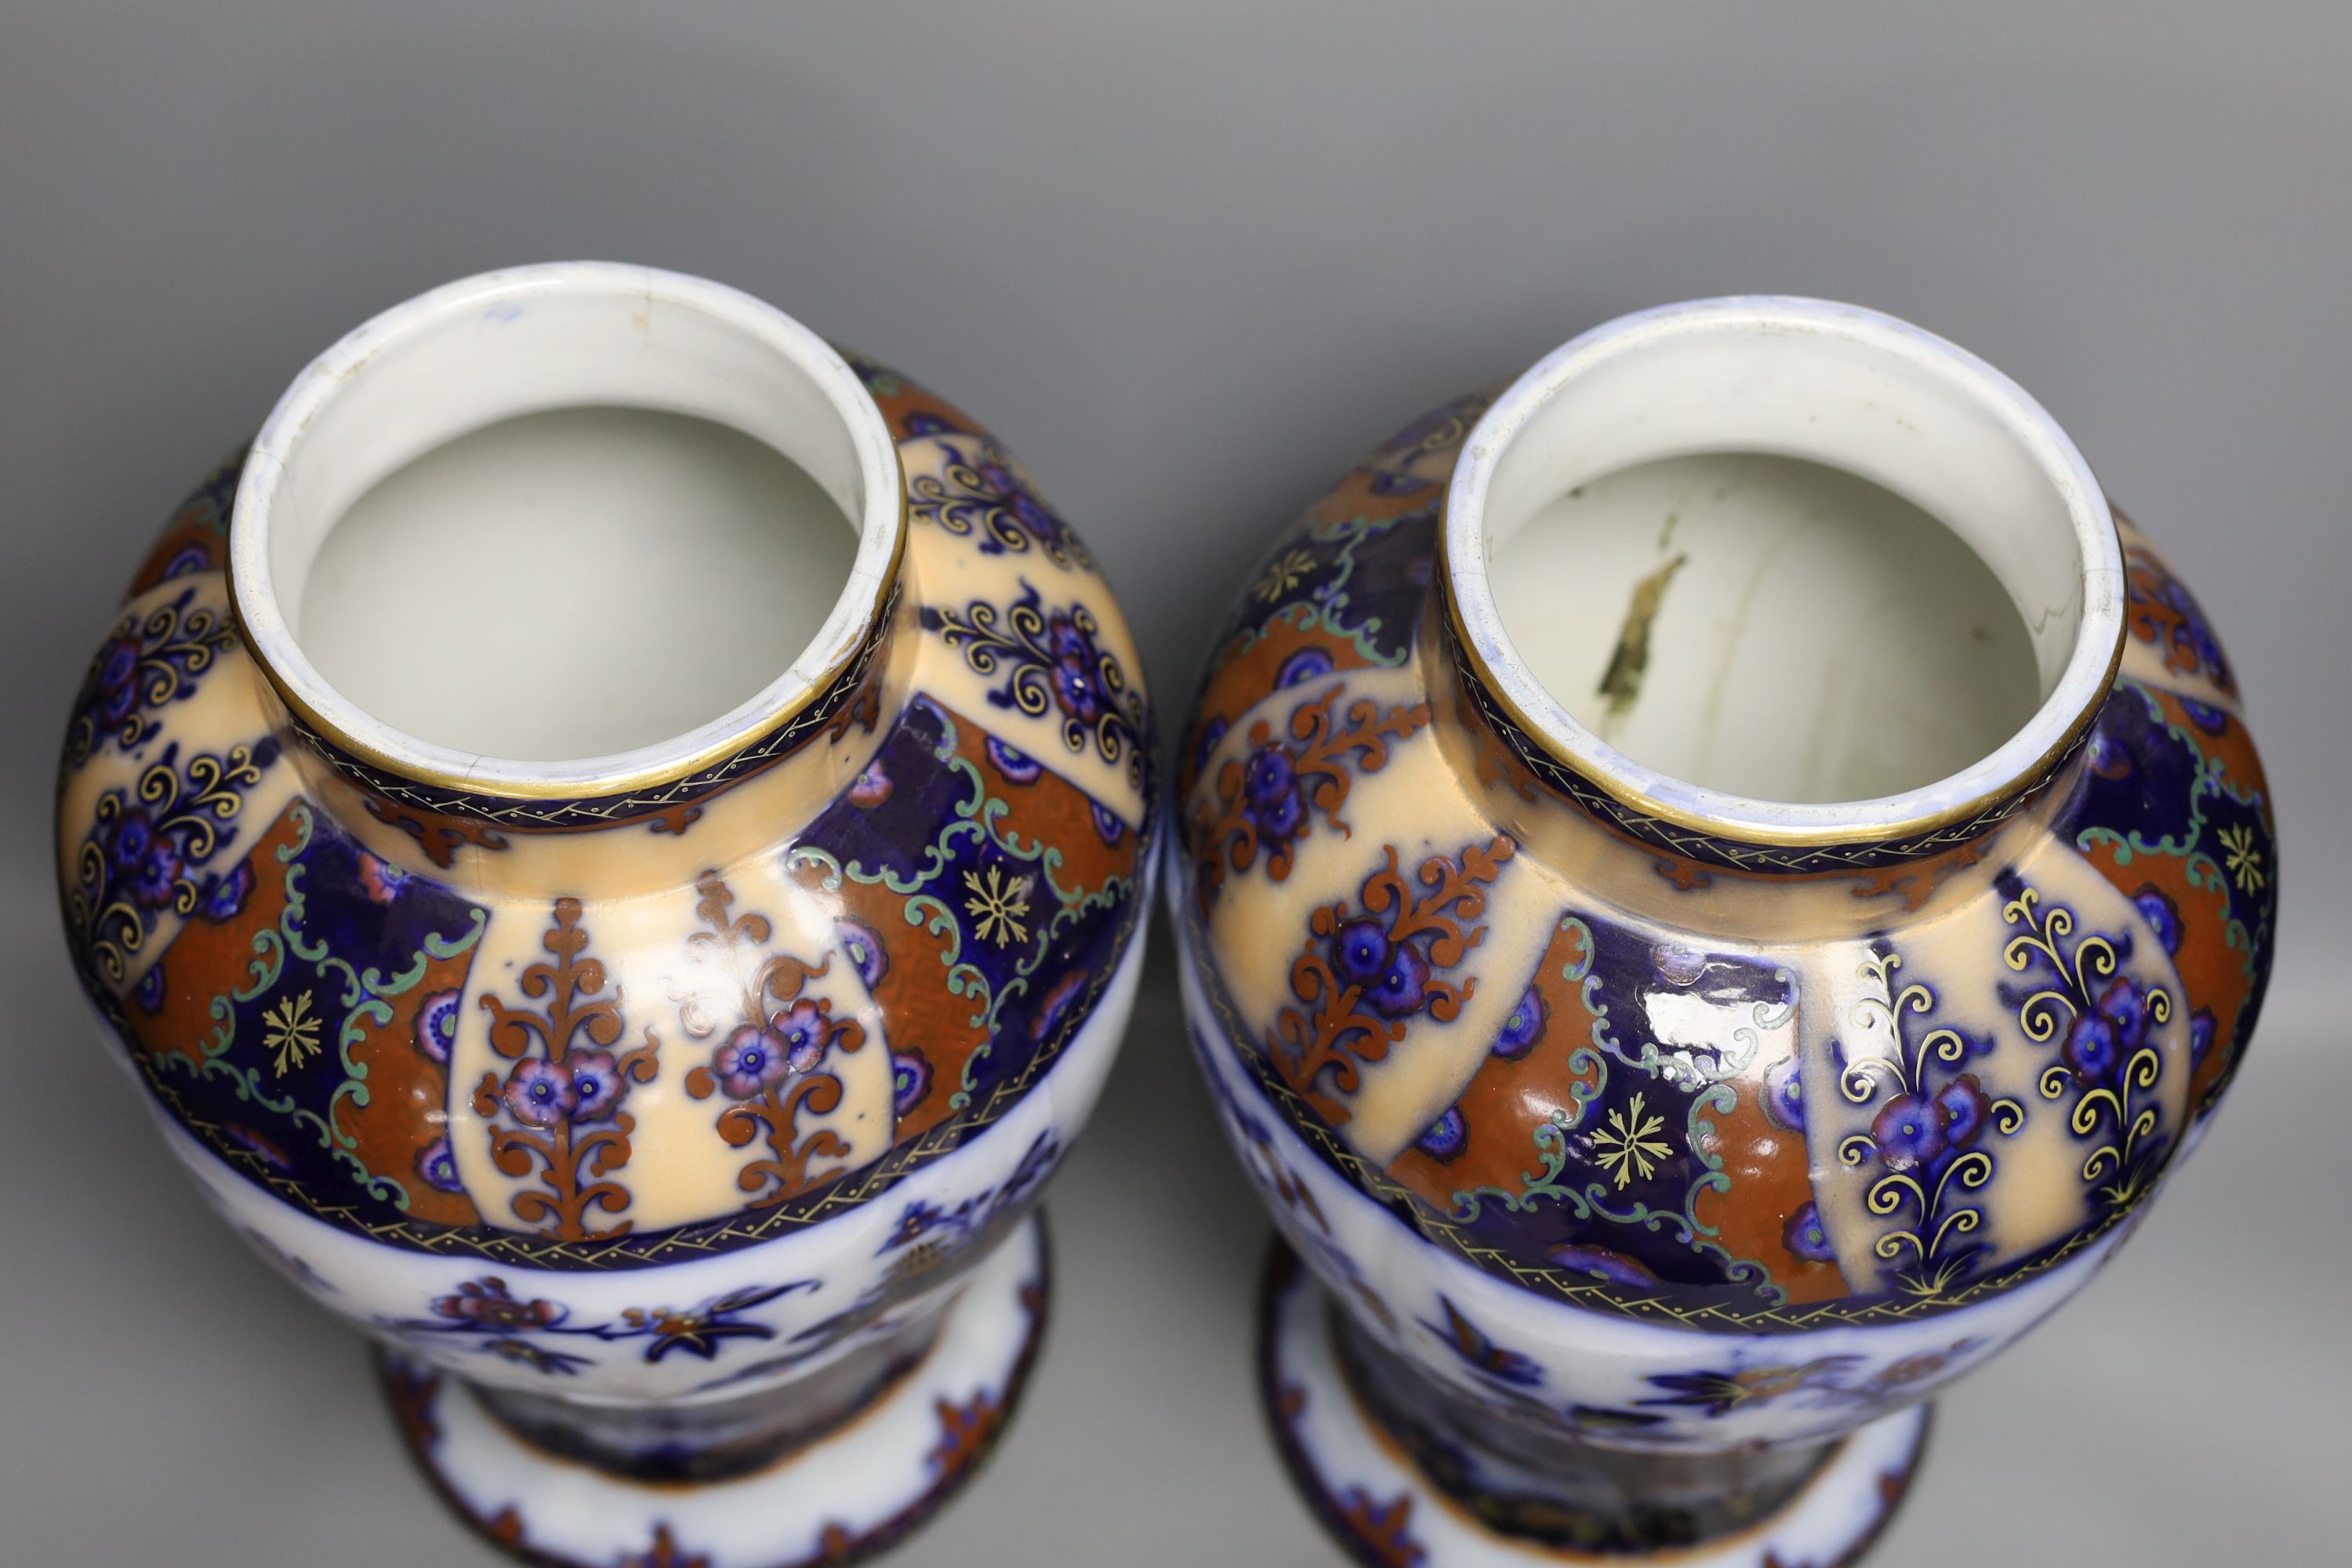 A pair of mid 19th century ironstone vases and covers - 51cm tall - Image 7 of 8